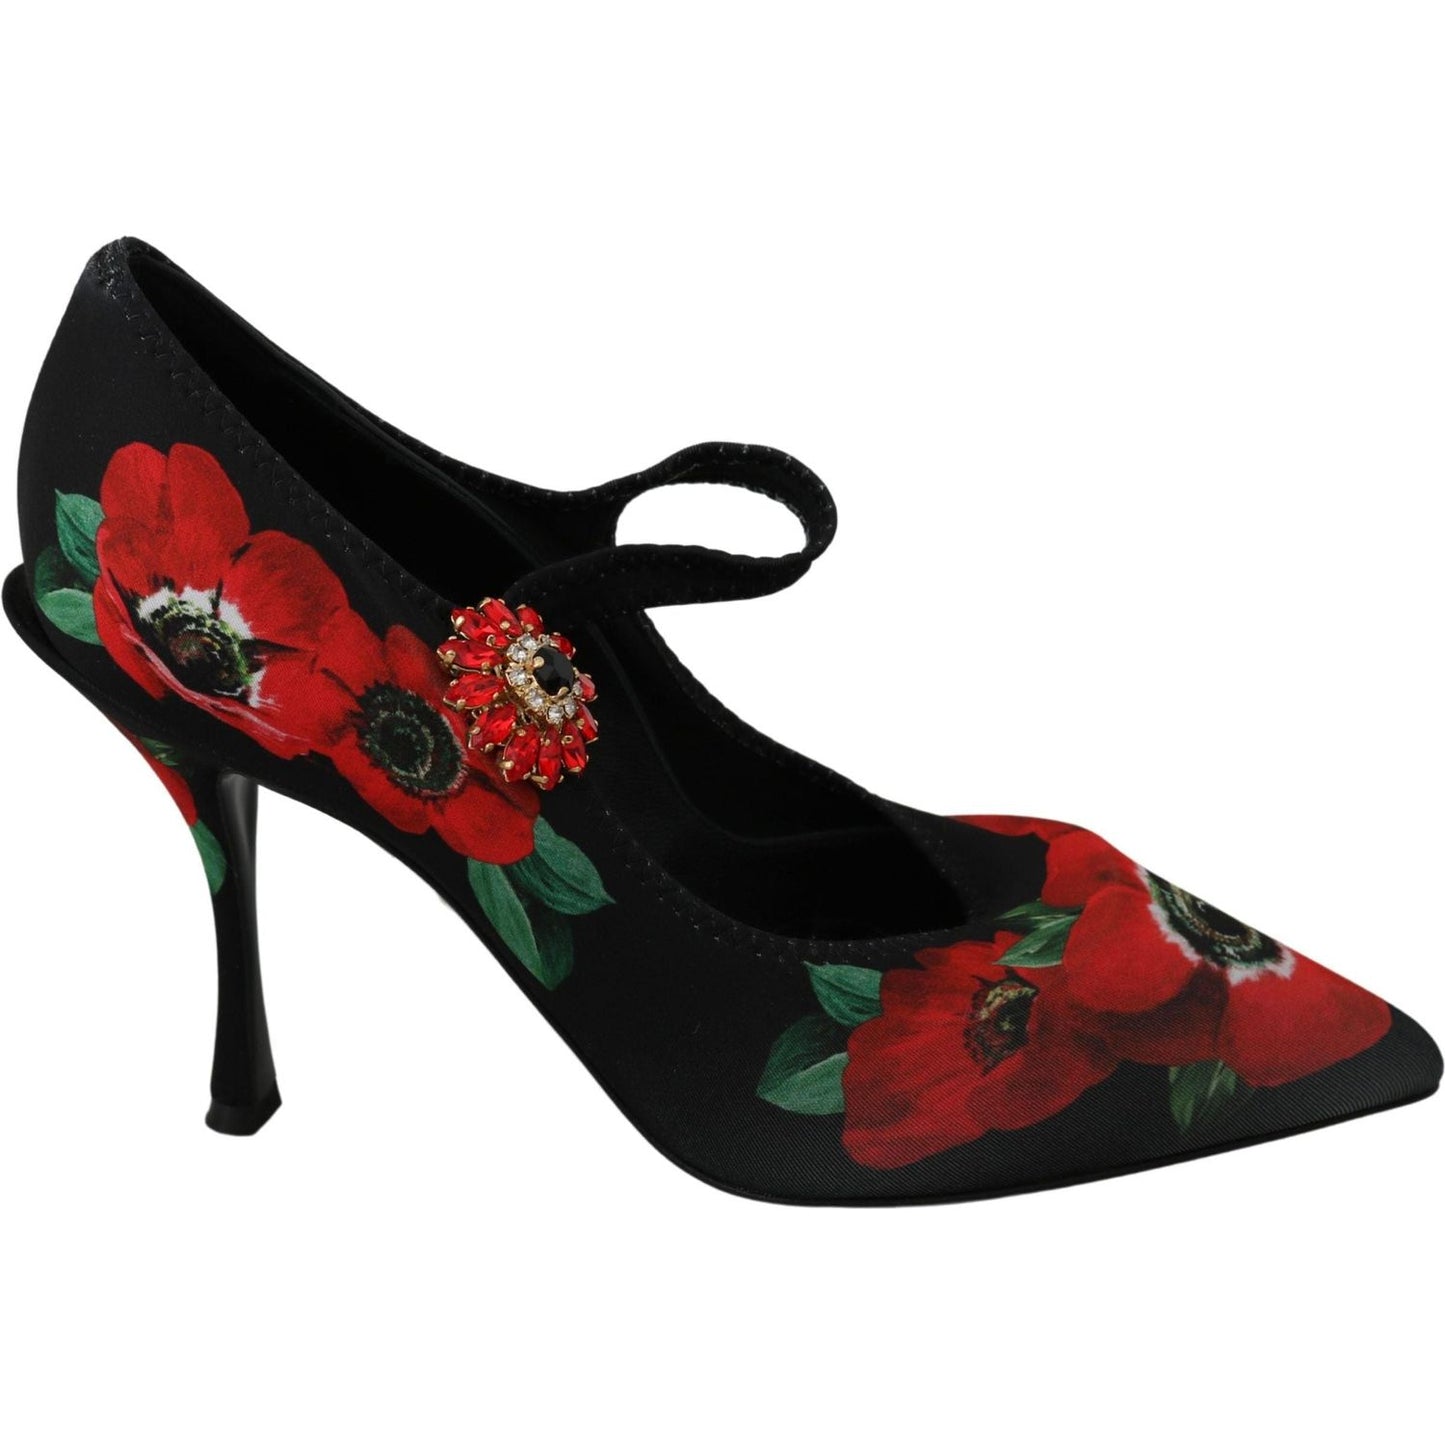 Dolce & Gabbana Floral Mary Janes Pumps with Crystal Detail black-red-floral-mary-janes-pumps-shoes Shoes IMG_0219-scaled-0b9f0c2d-0ff.jpg